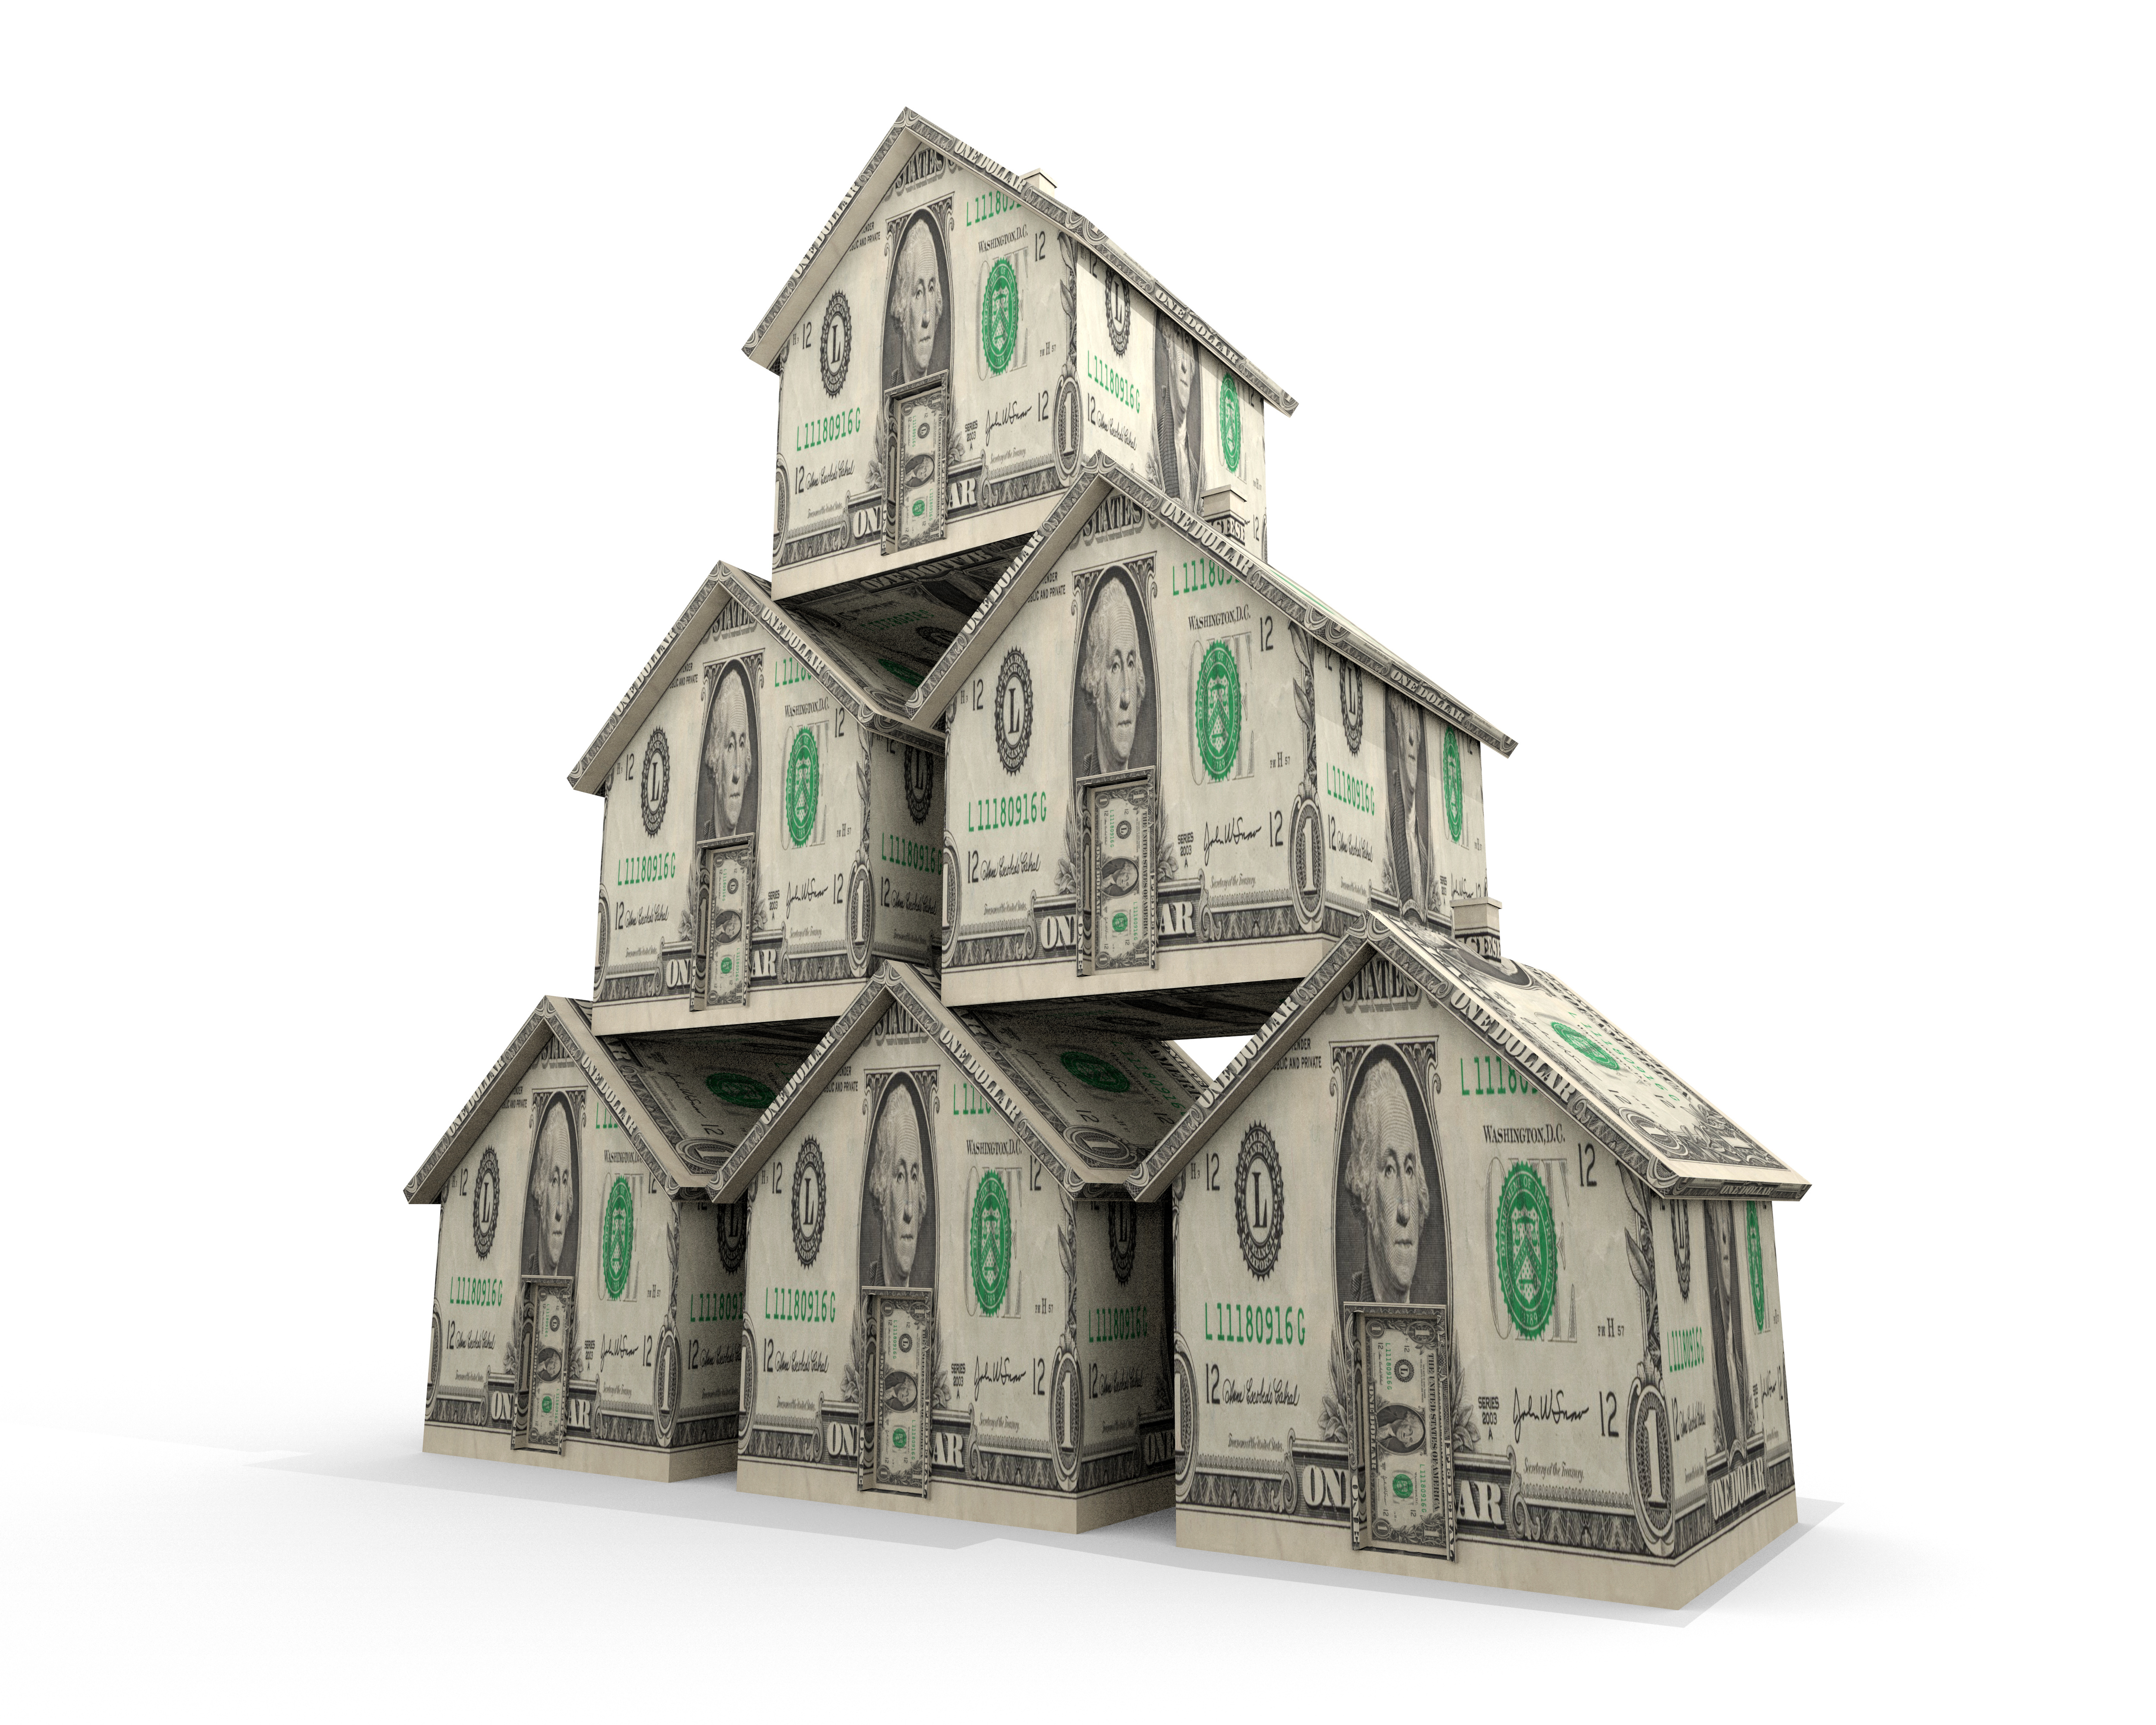 Pyramid of six model houses, each papered with images of U.S. dollars.